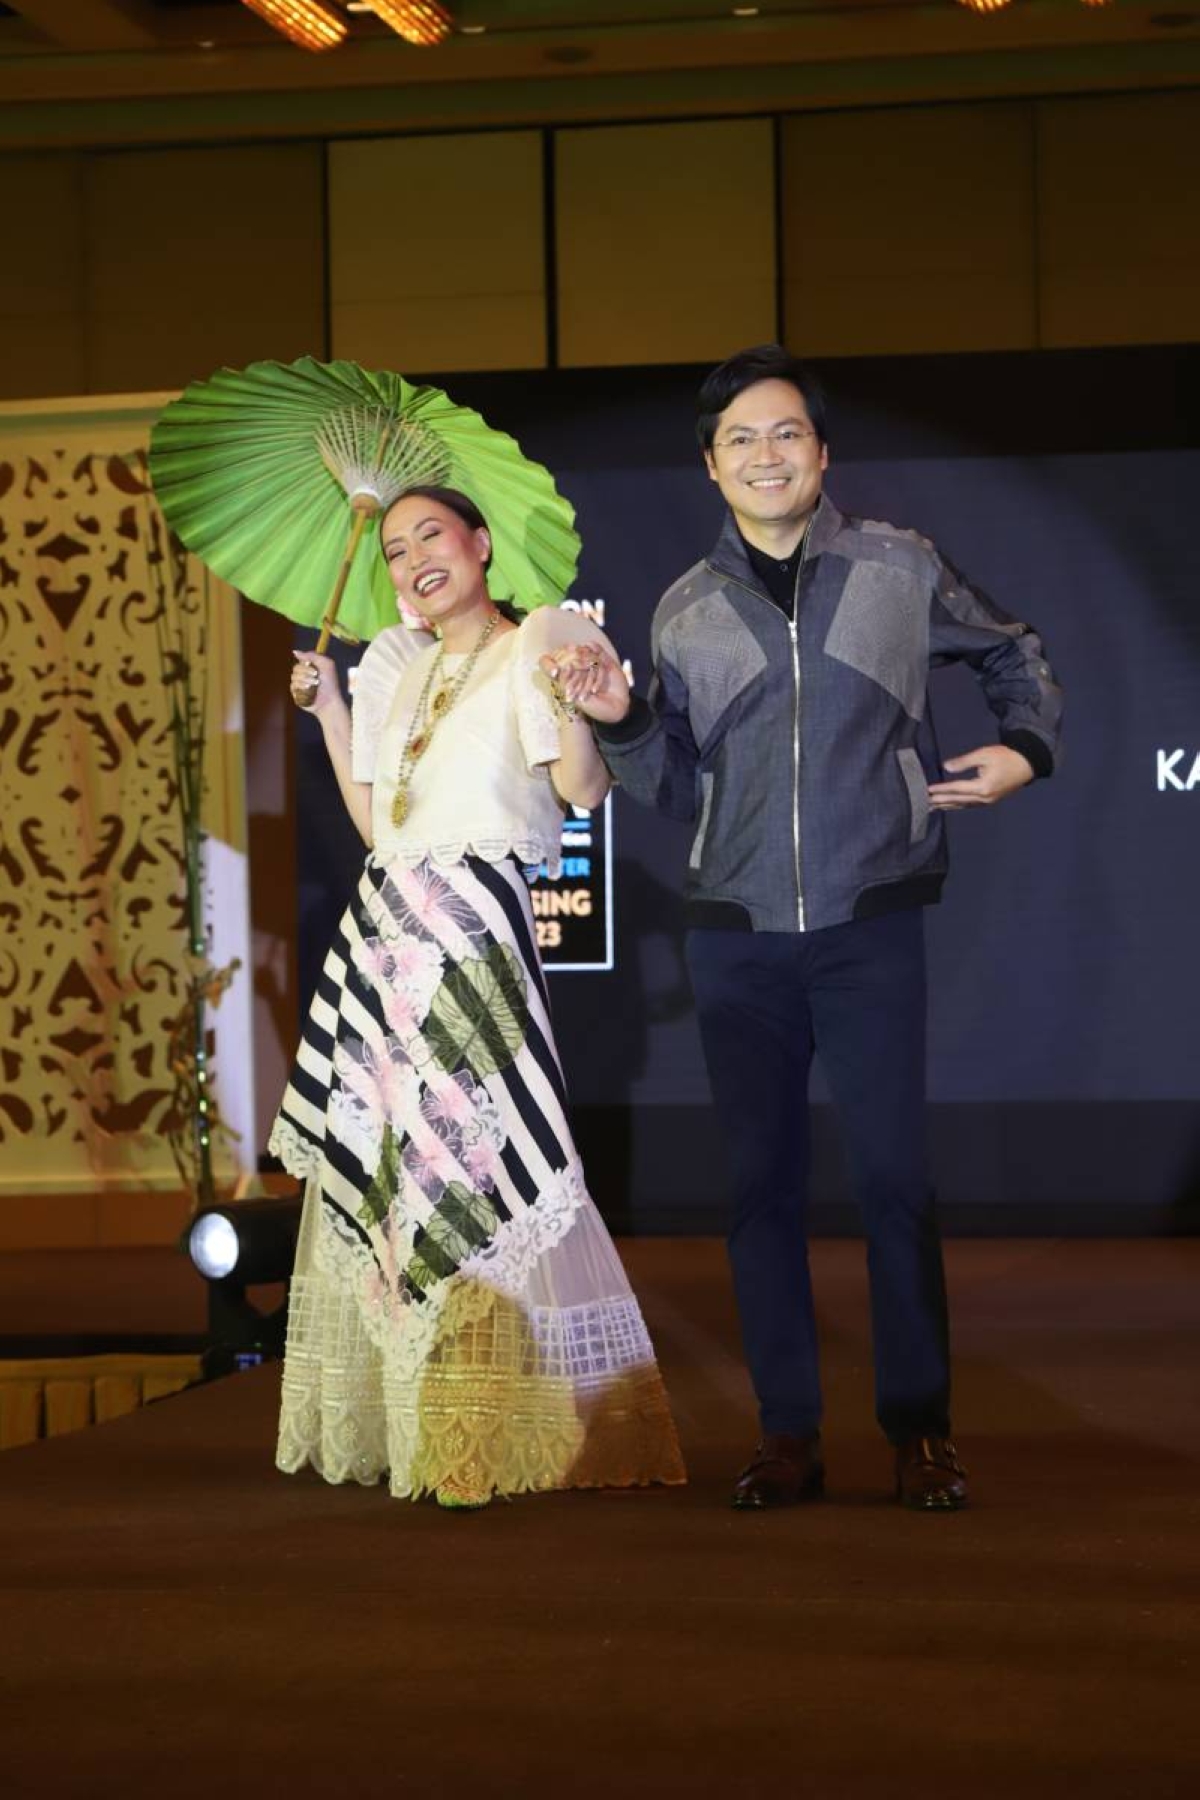 Tourism Promotions Board Chief Operating Officer Marga Nograles and her husband, Civil Service Commission Chairperson Karlo Nograles, showcased the creations of Cebu's fashion designer Philip Rodriguez.